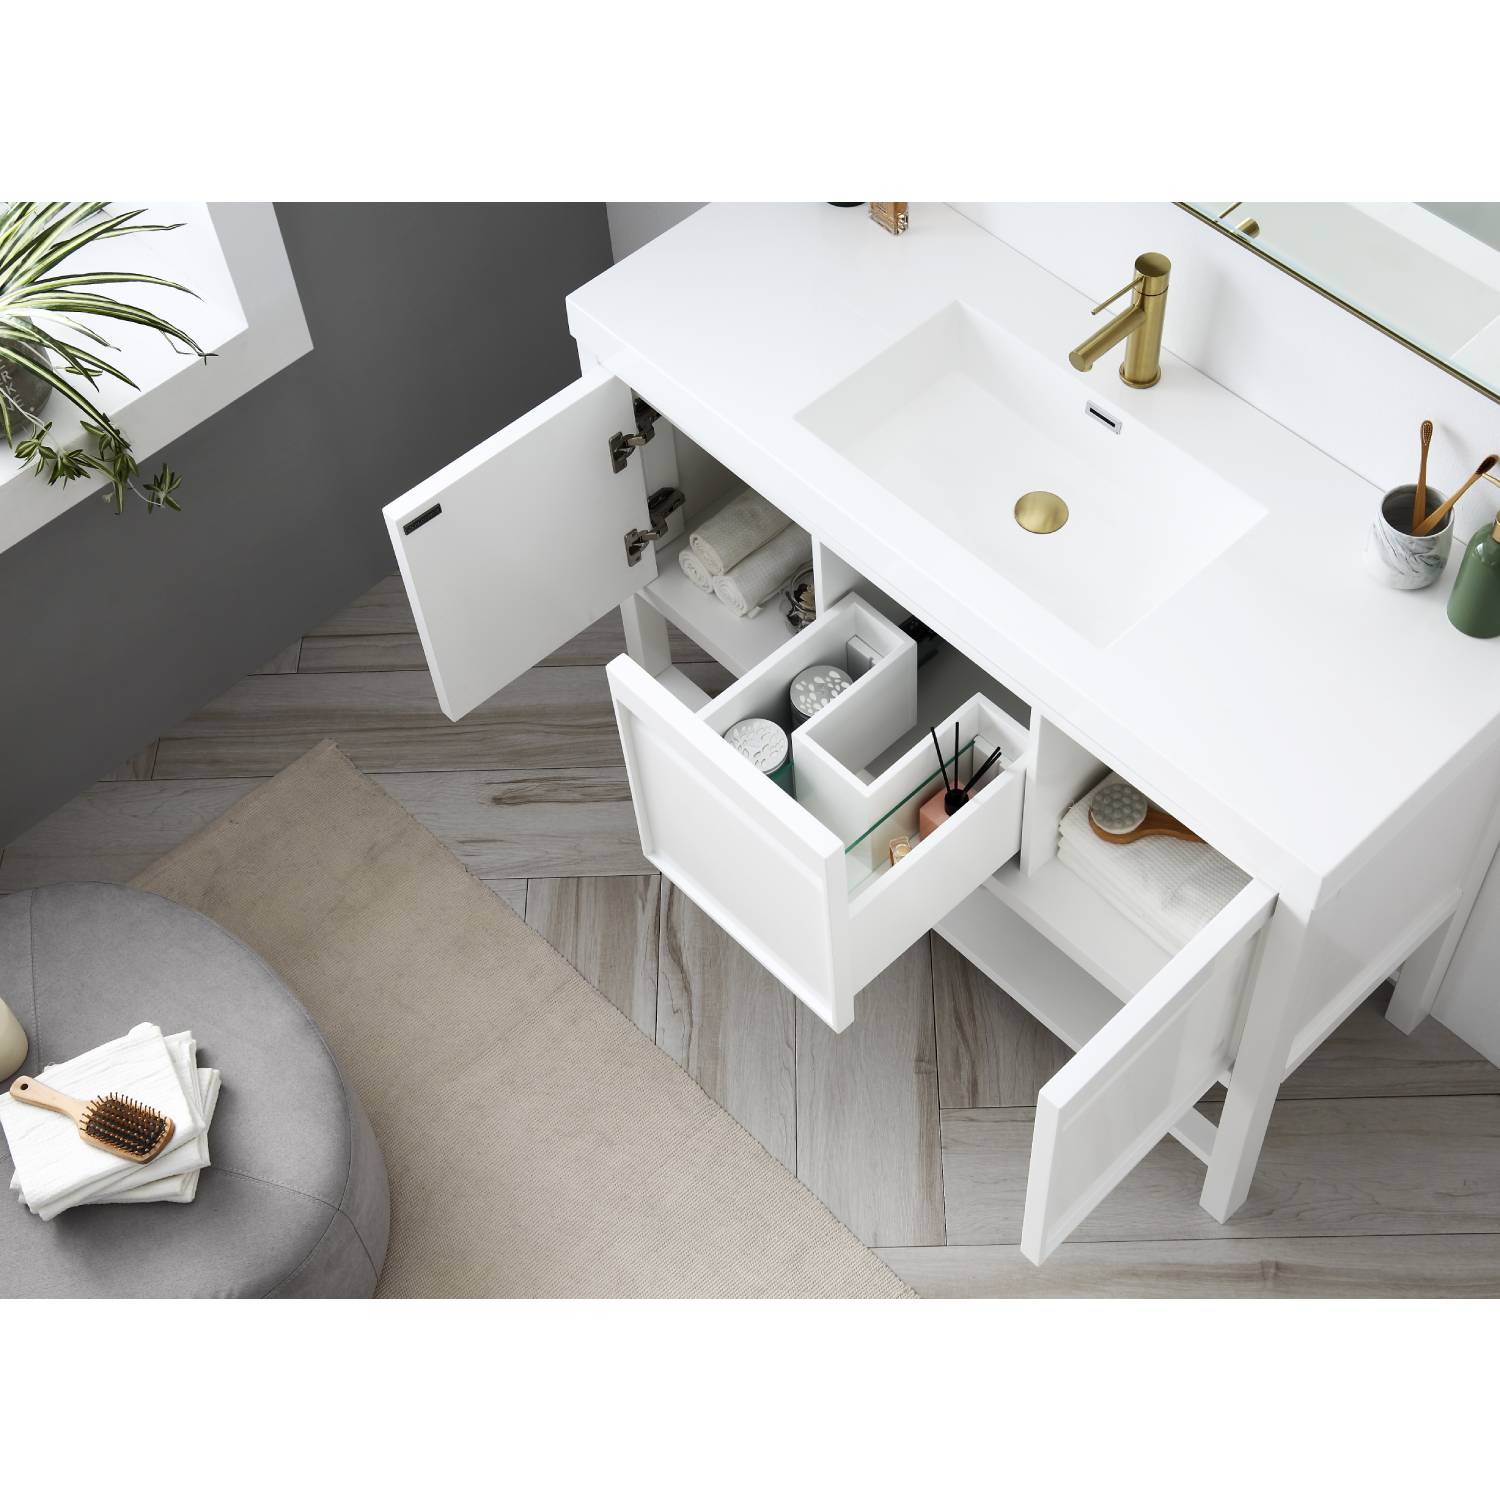 Vienna - 48 Inch Vanity with Acrylic Single Sink - White - Molaix842708122963Vienna021 48 01S A